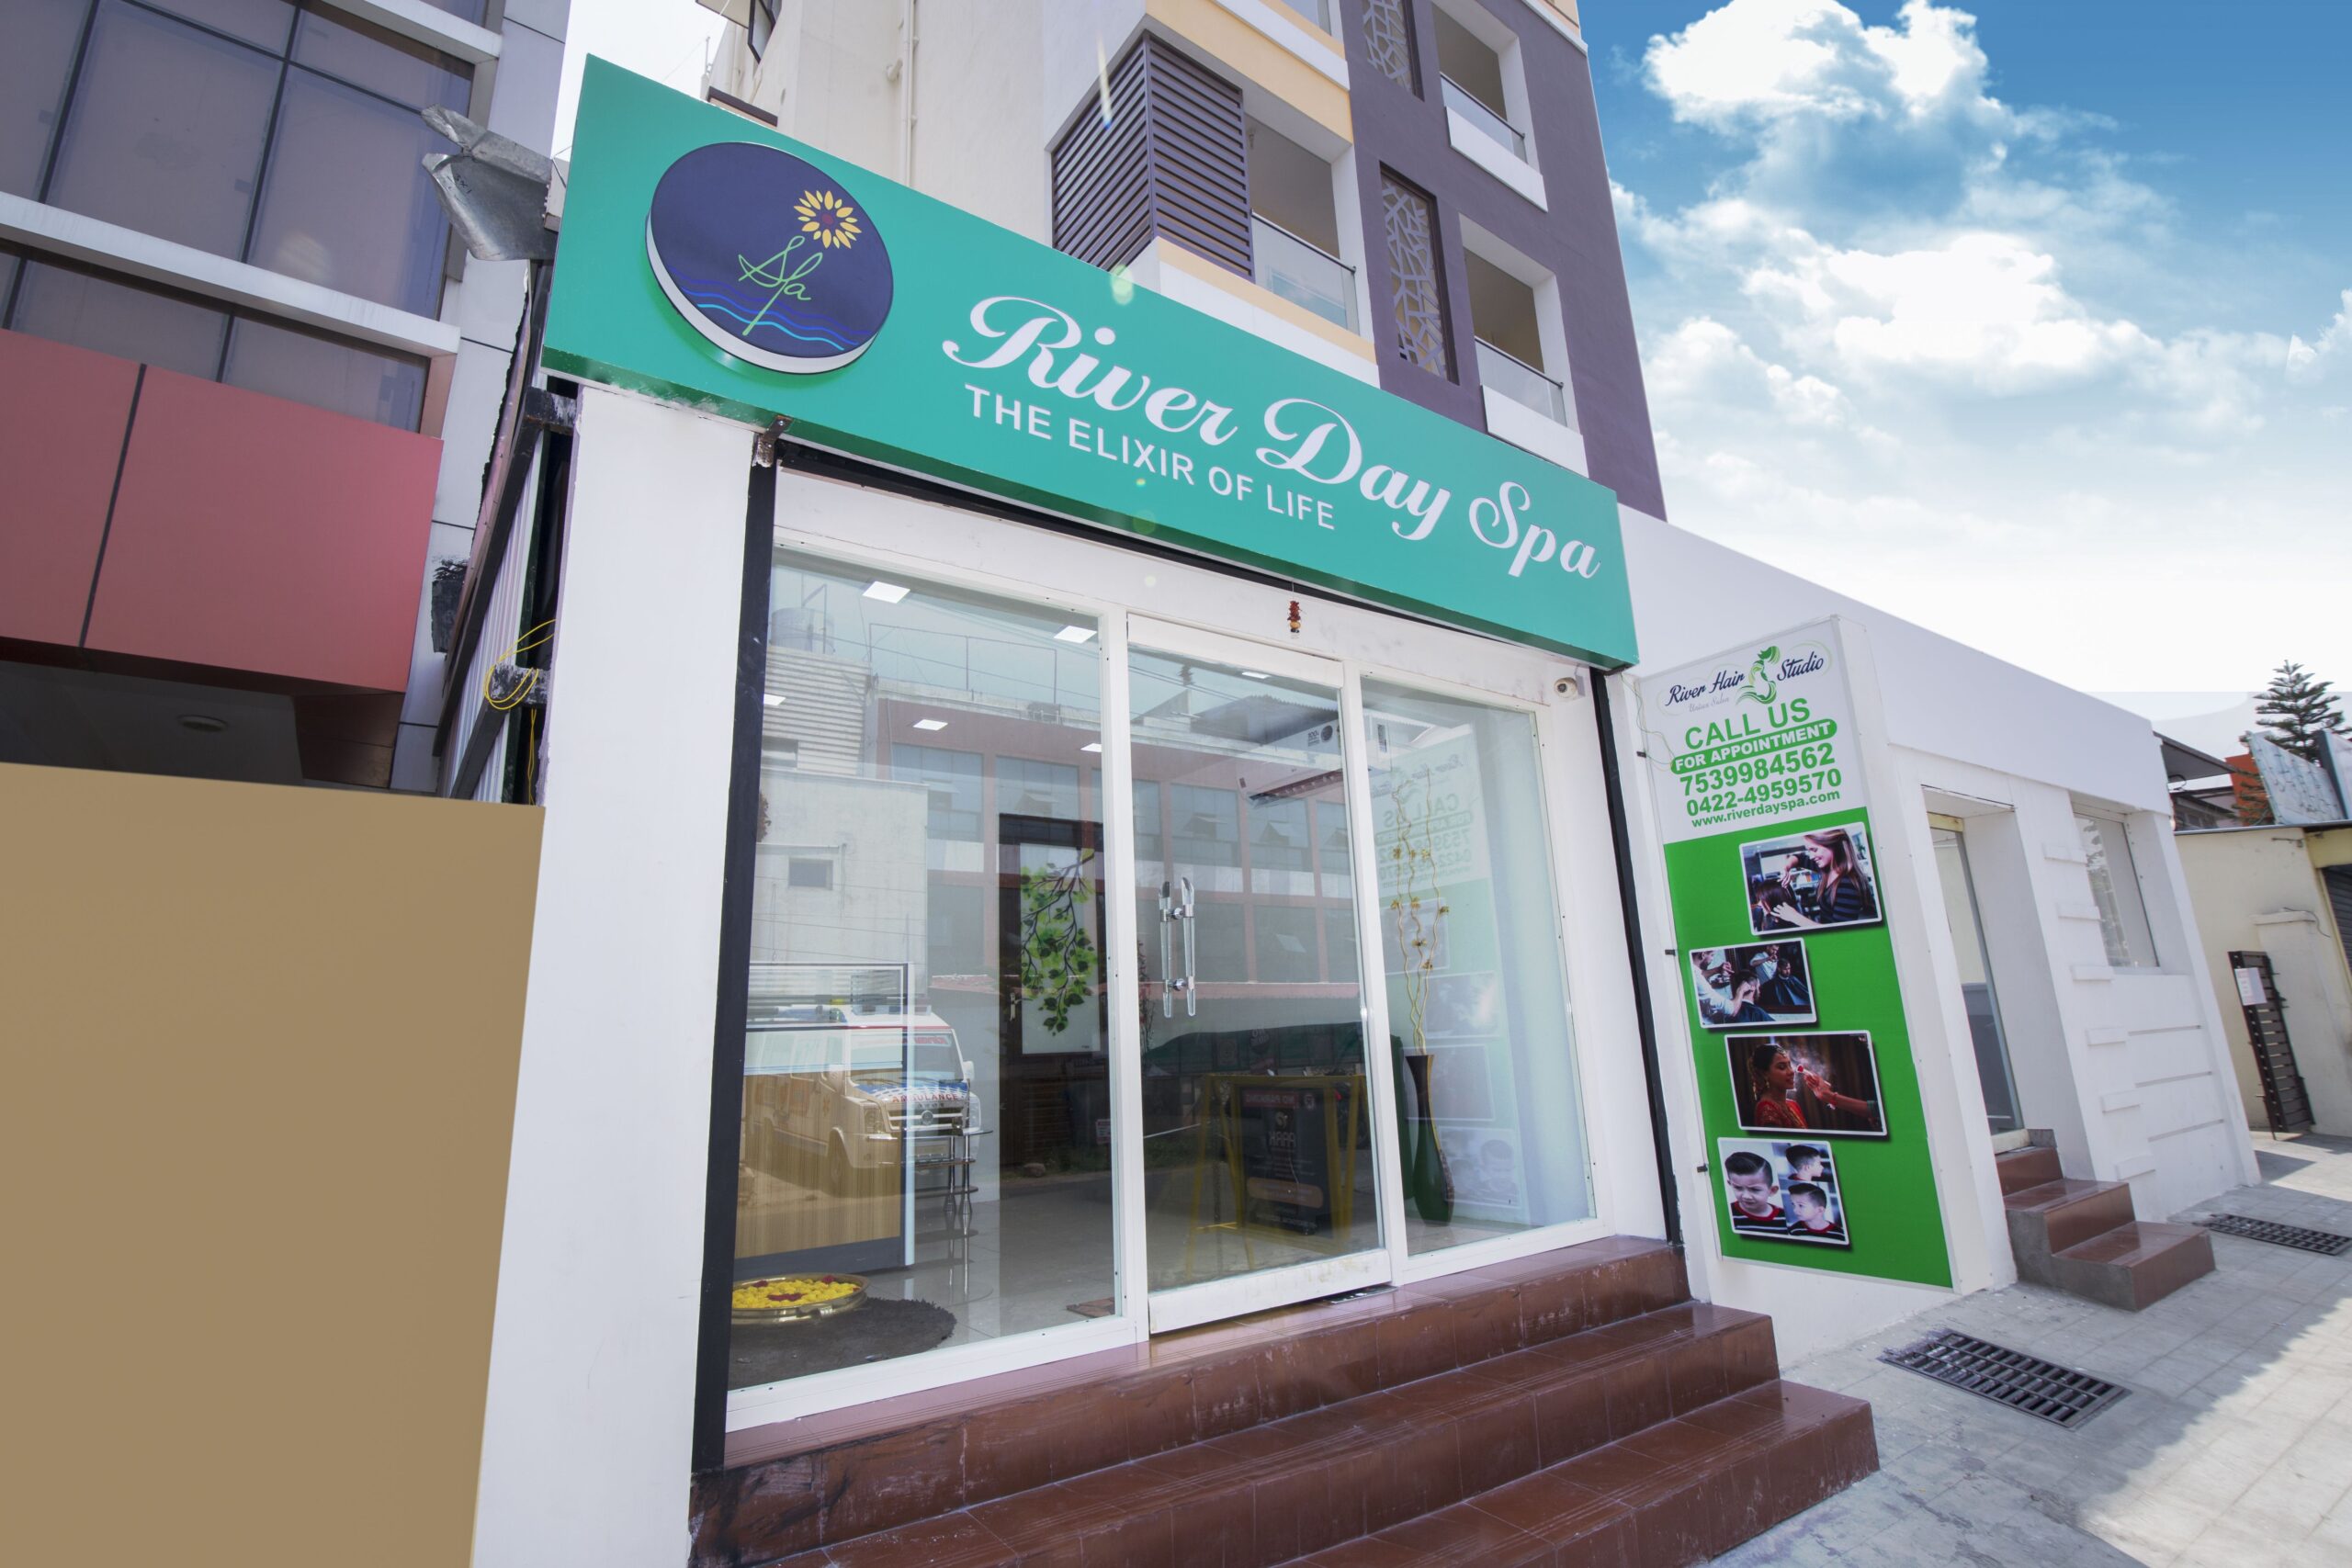 The River Day Spa building's front view features a front glass door and a vertical banner advertising their services, along with a contact number and a LED logo and signboard.